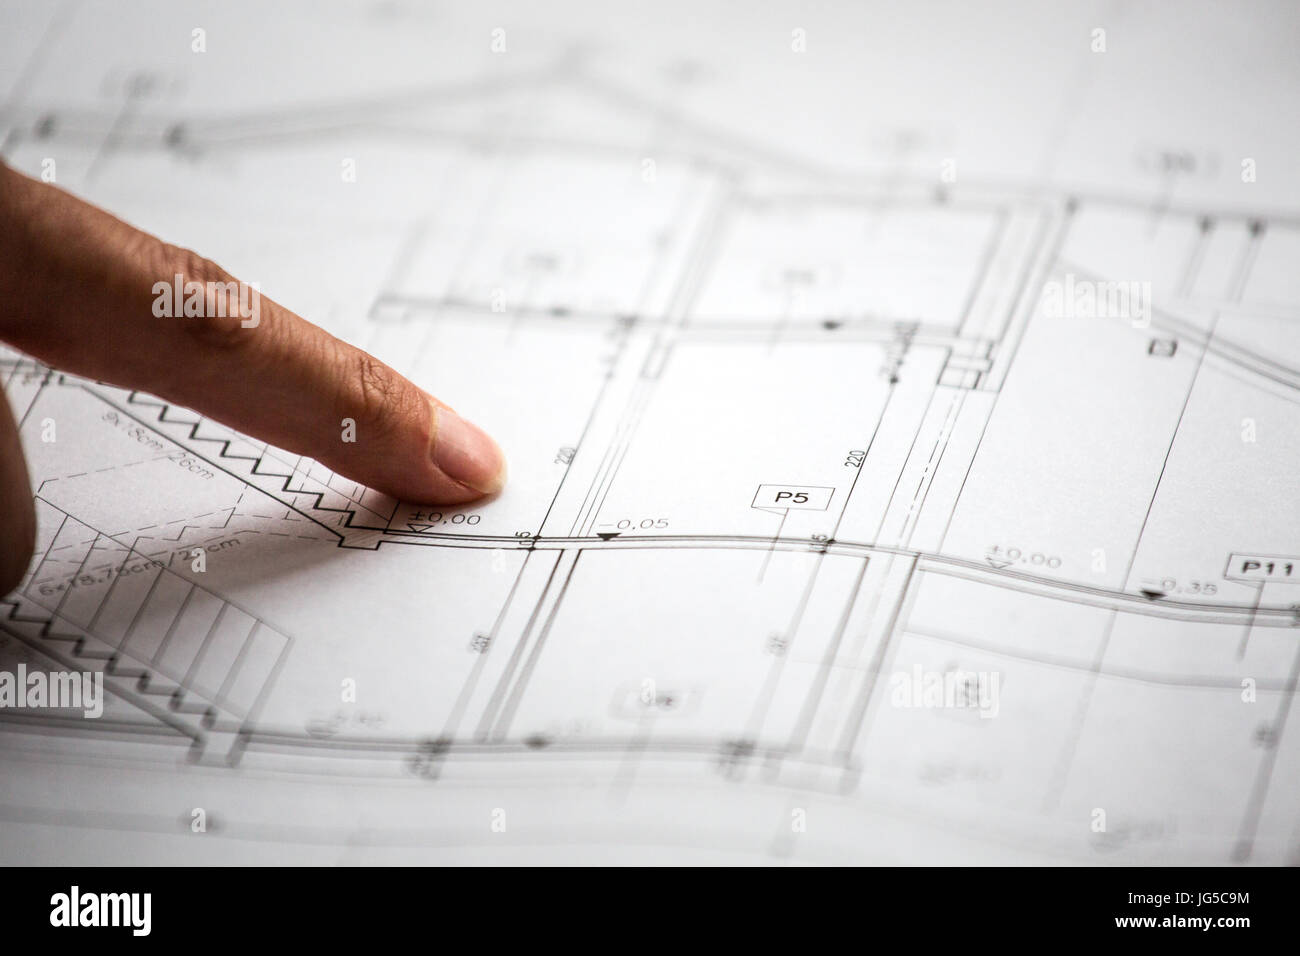 Pointing to specific place on architectural sketches of new house Stock Photo